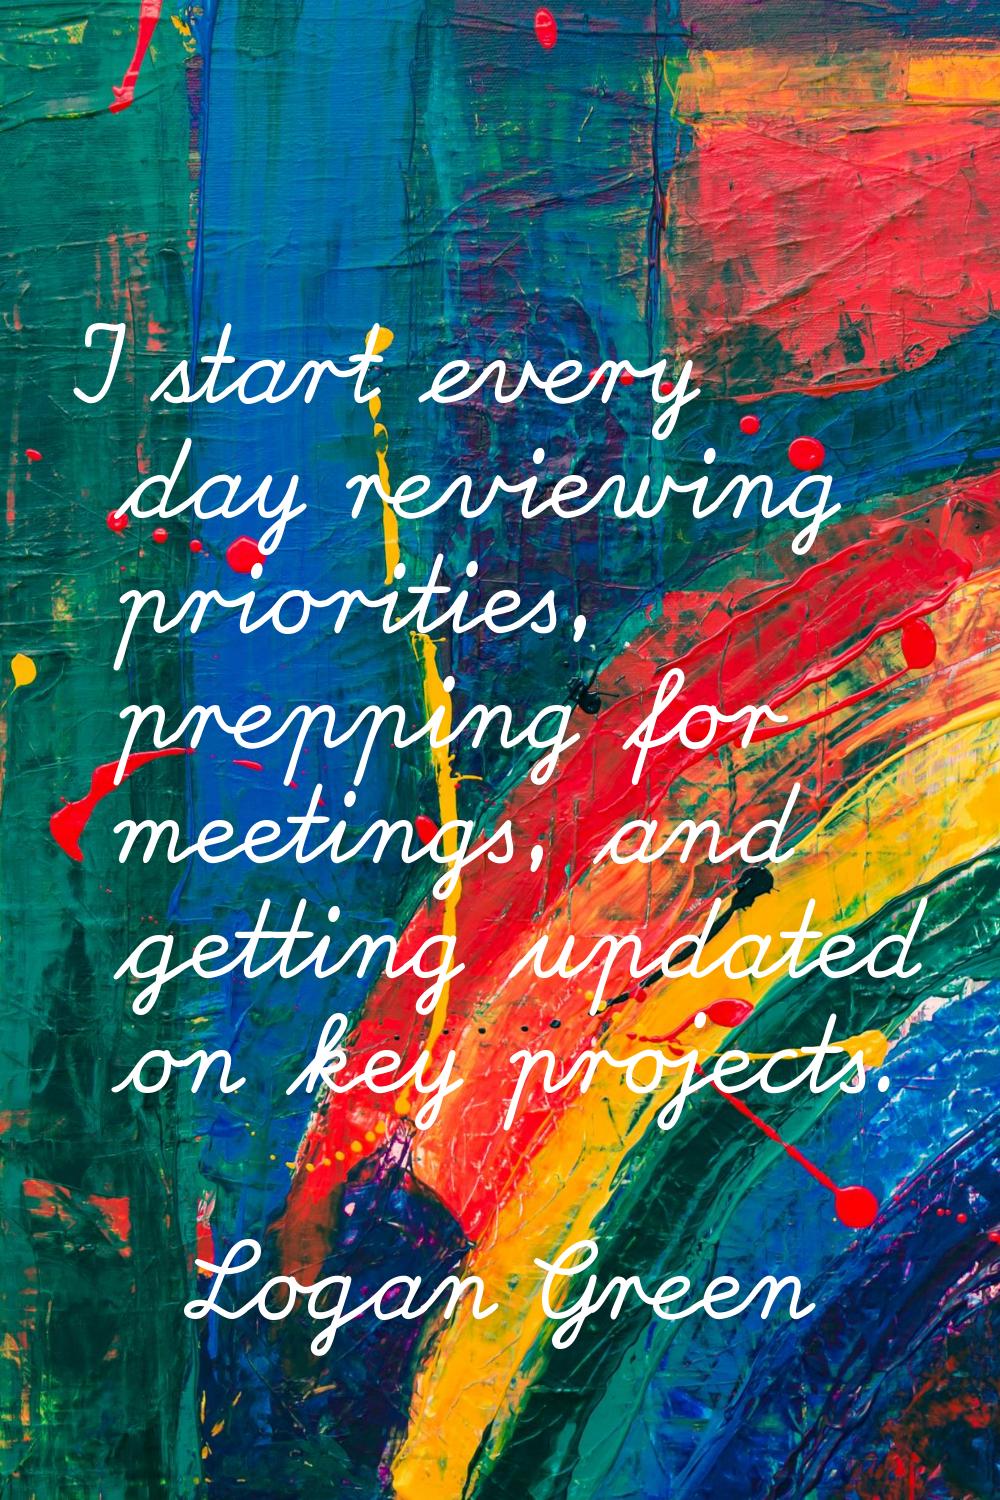 I start every day reviewing priorities, prepping for meetings, and getting updated on key projects.